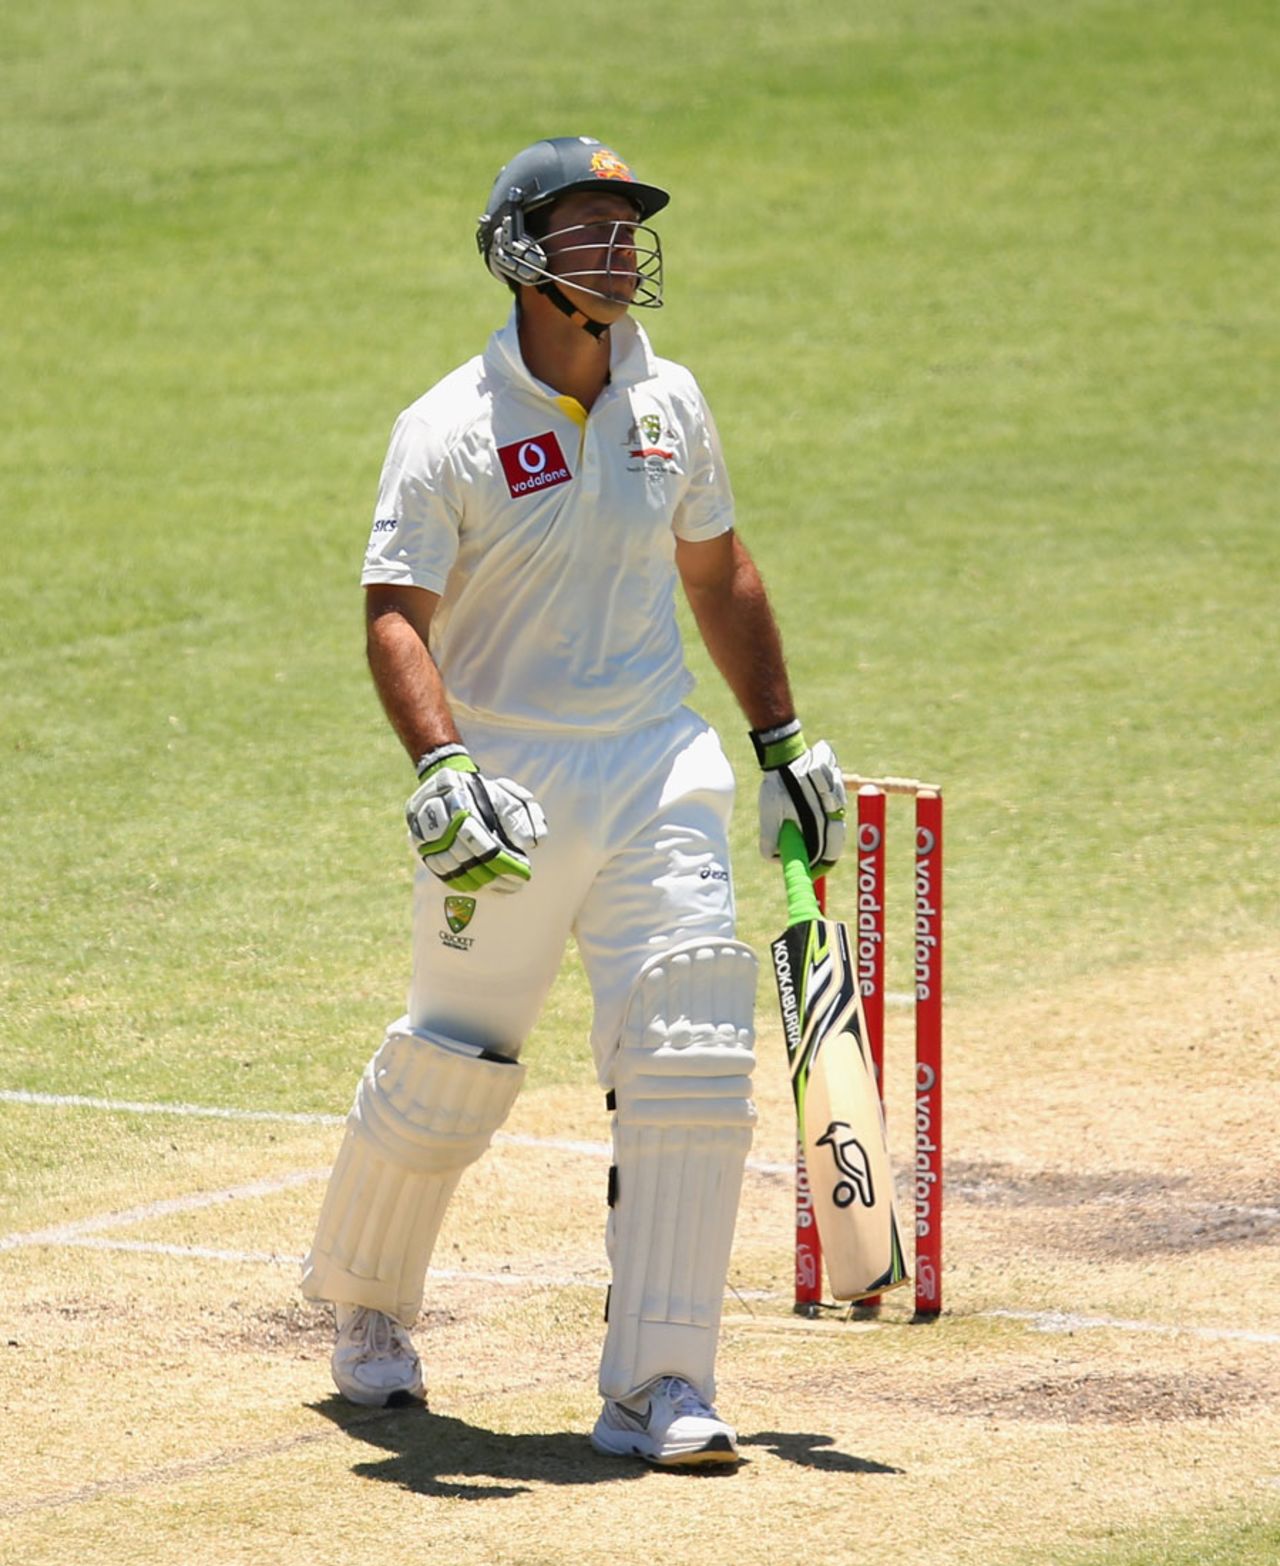 A disappointed Ricky Ponting after his dismissal, Australia v South Africa, 3rd Test, Perth, 4th day, December 3, 2012